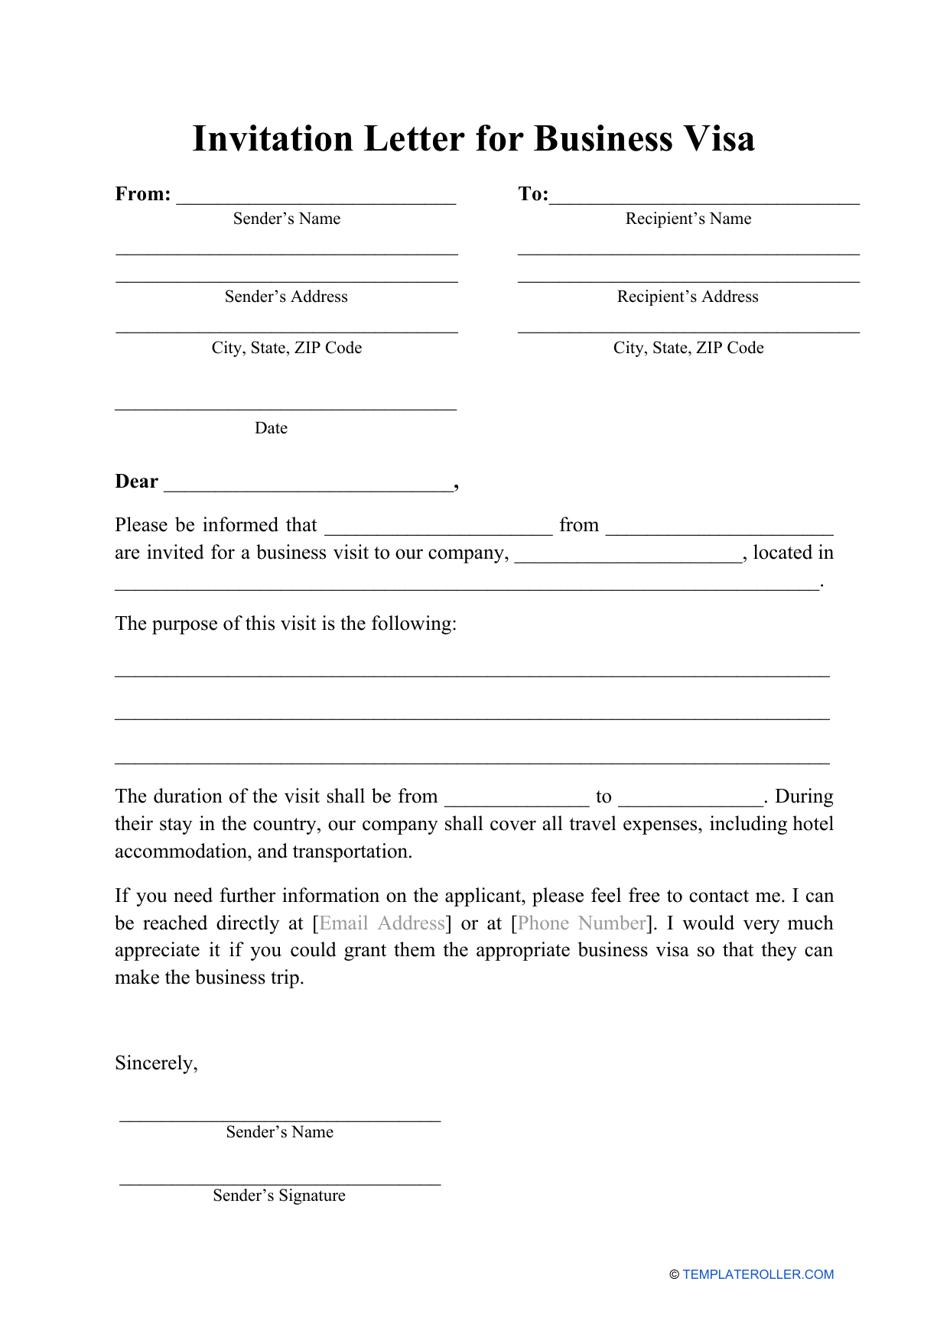 Invitation Letter for Business Visa Template - Fill Out, Sign Online